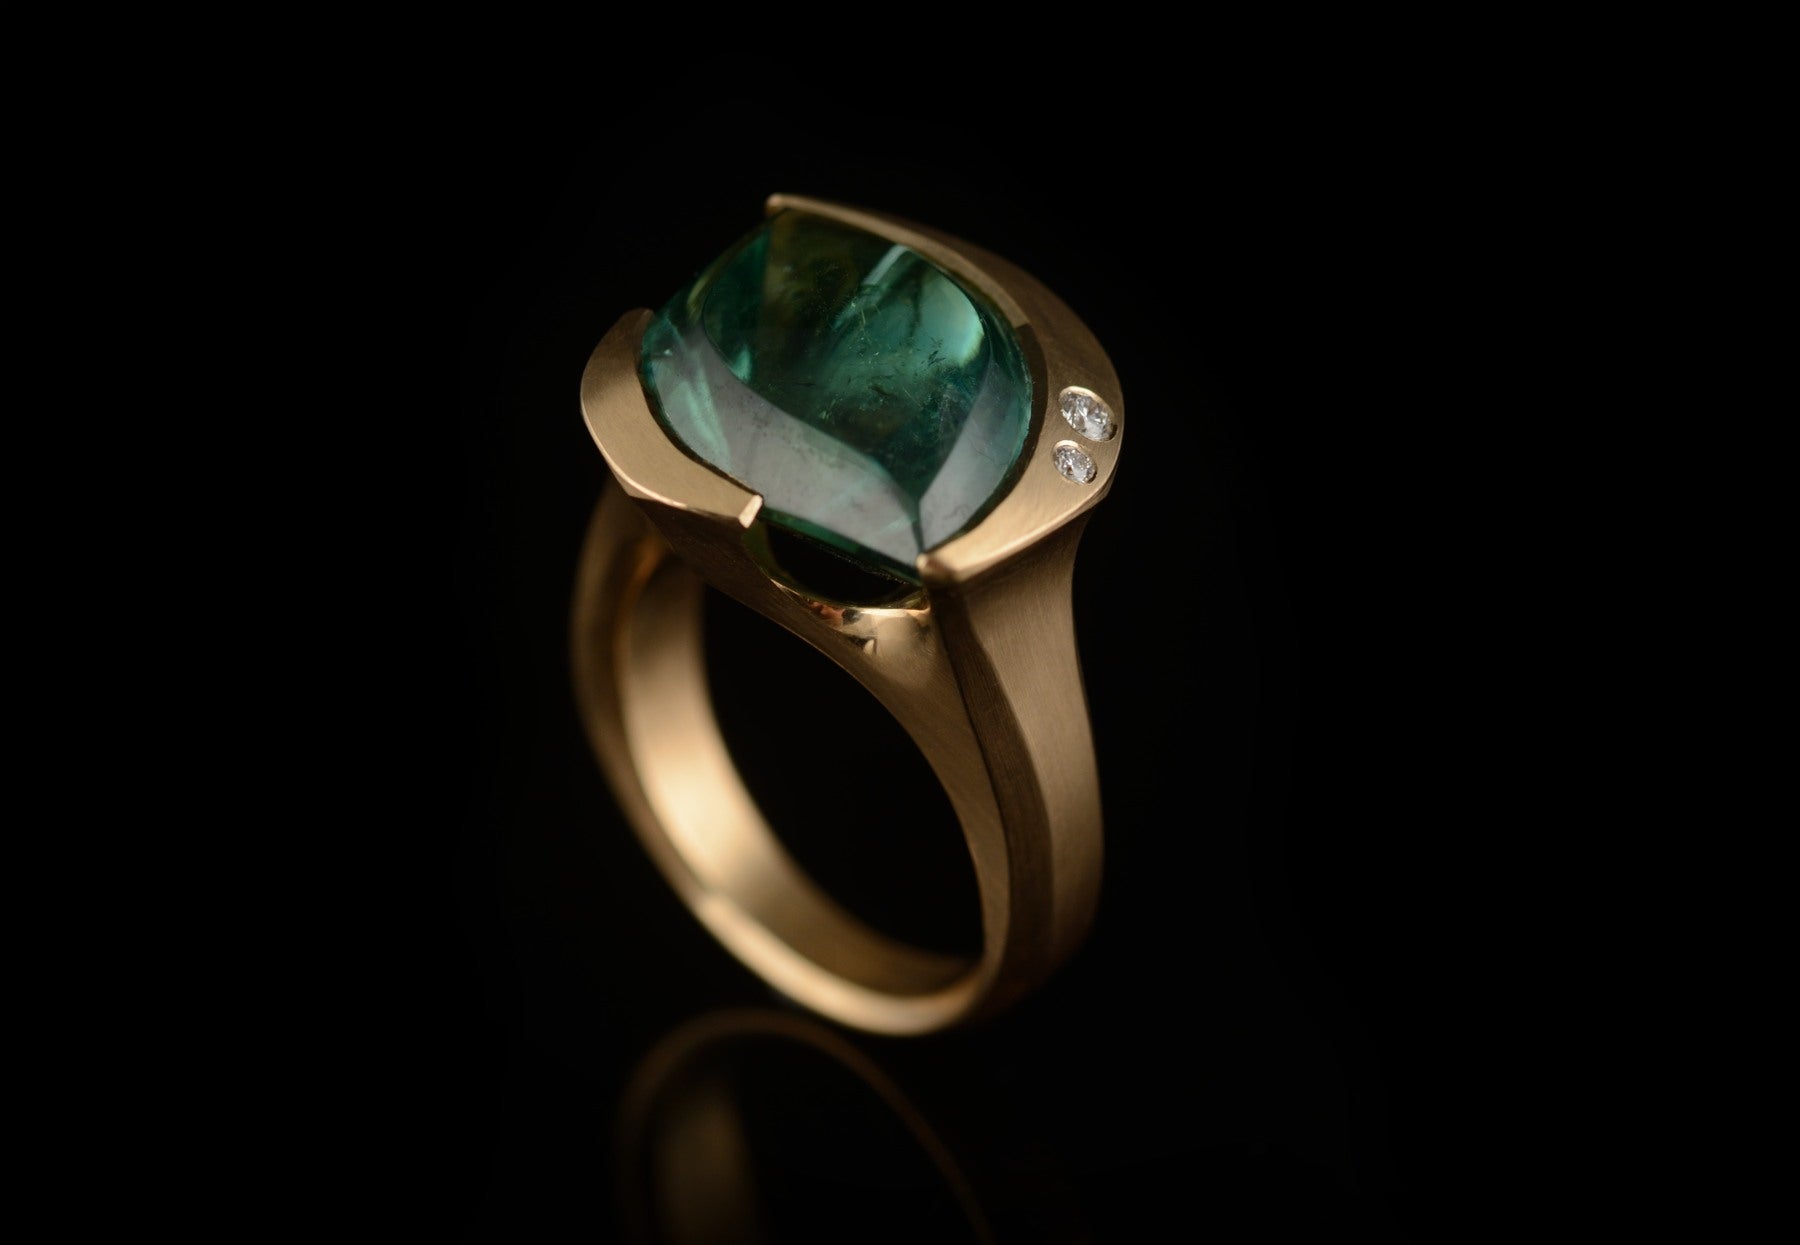 Carved rose gold and green tourmaline cocktail ring 